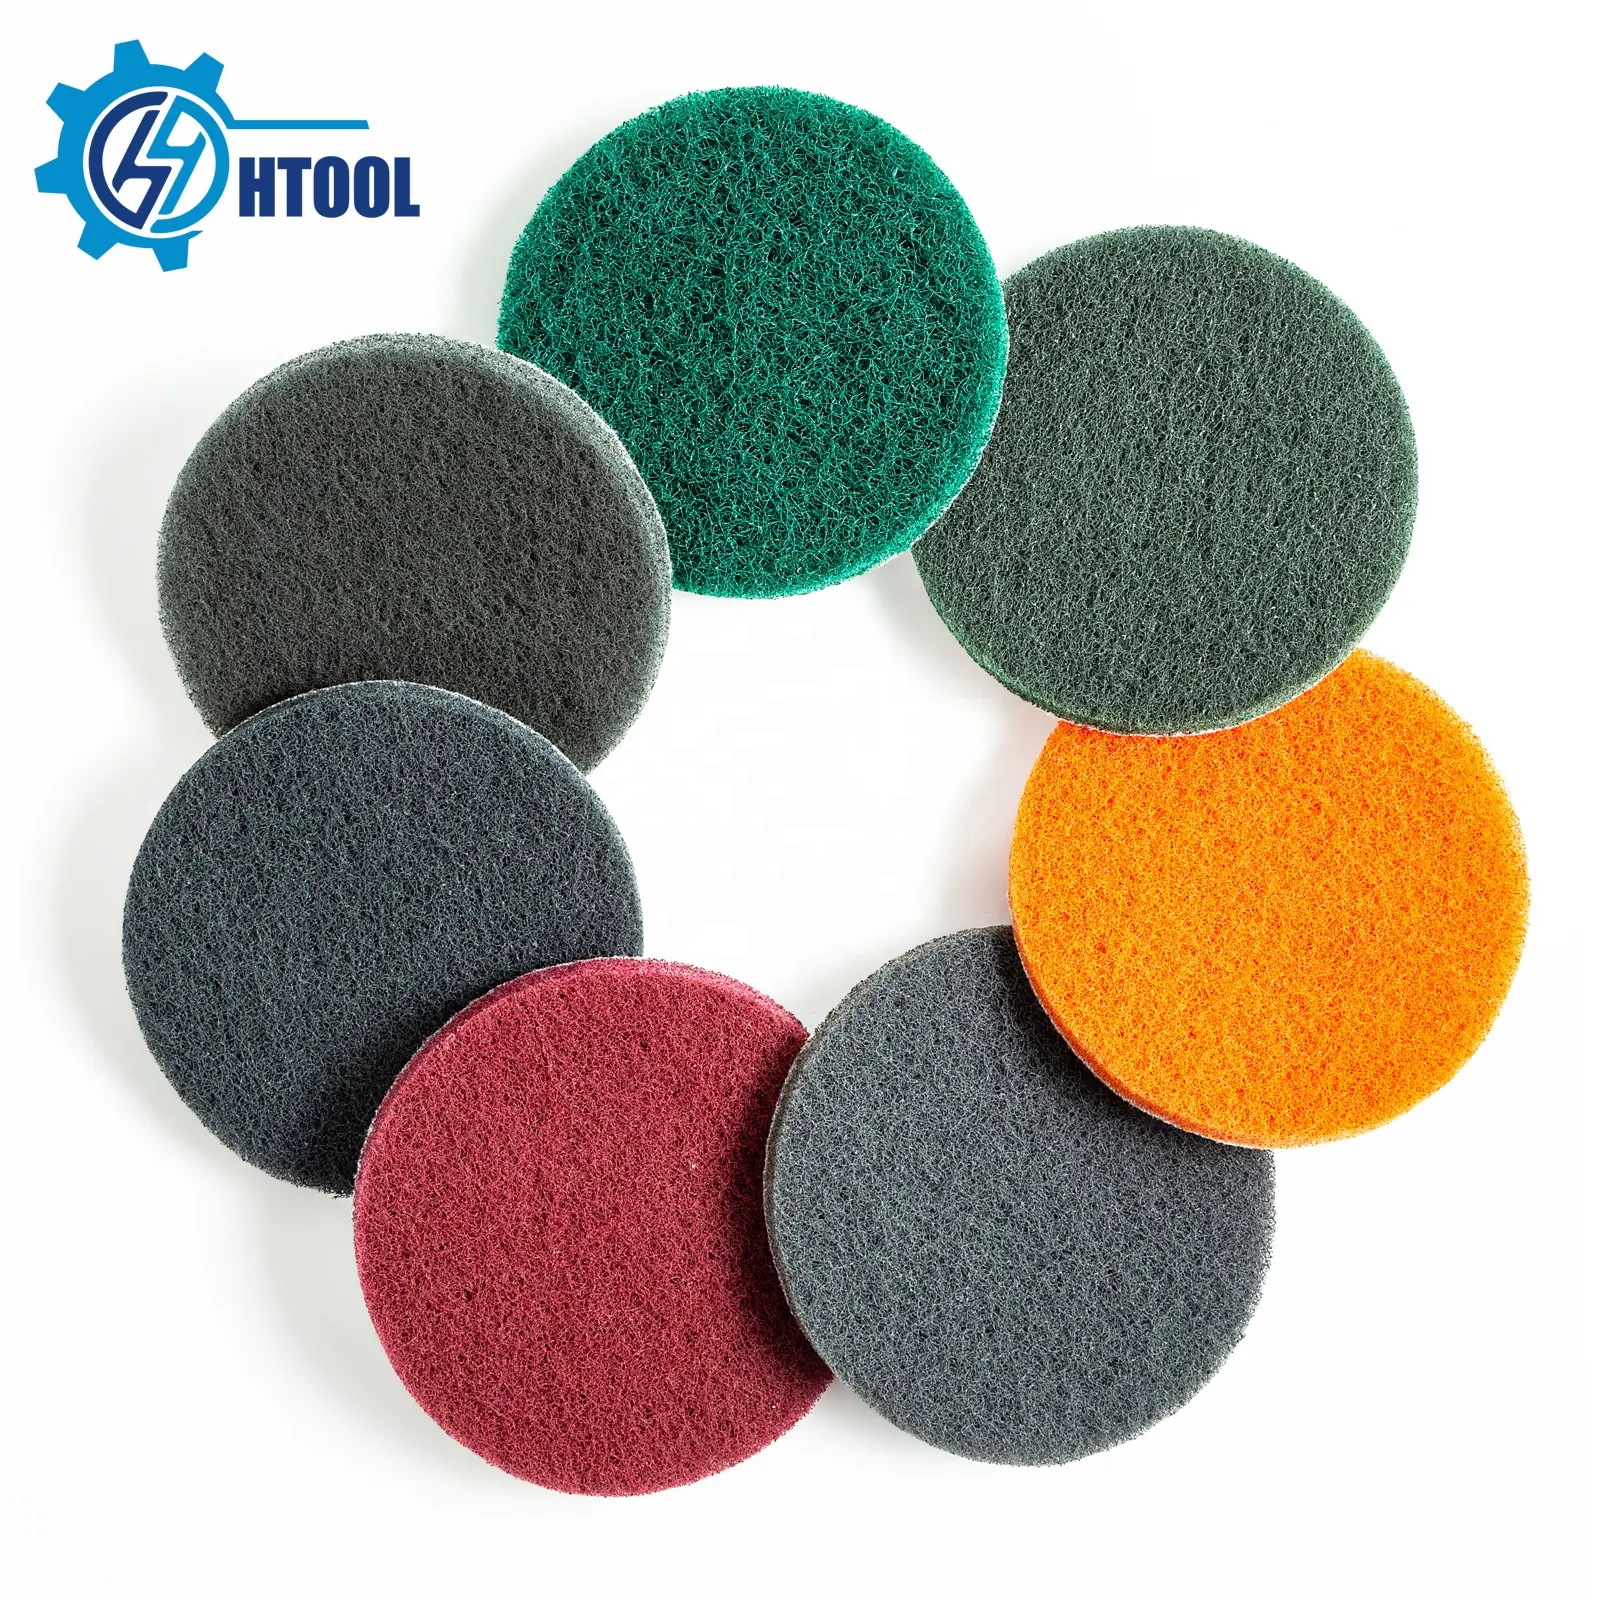 Non-woven Nylon Backing Scouring Pads for Auto Car Metal Surface Polishing Deburring Cleaning